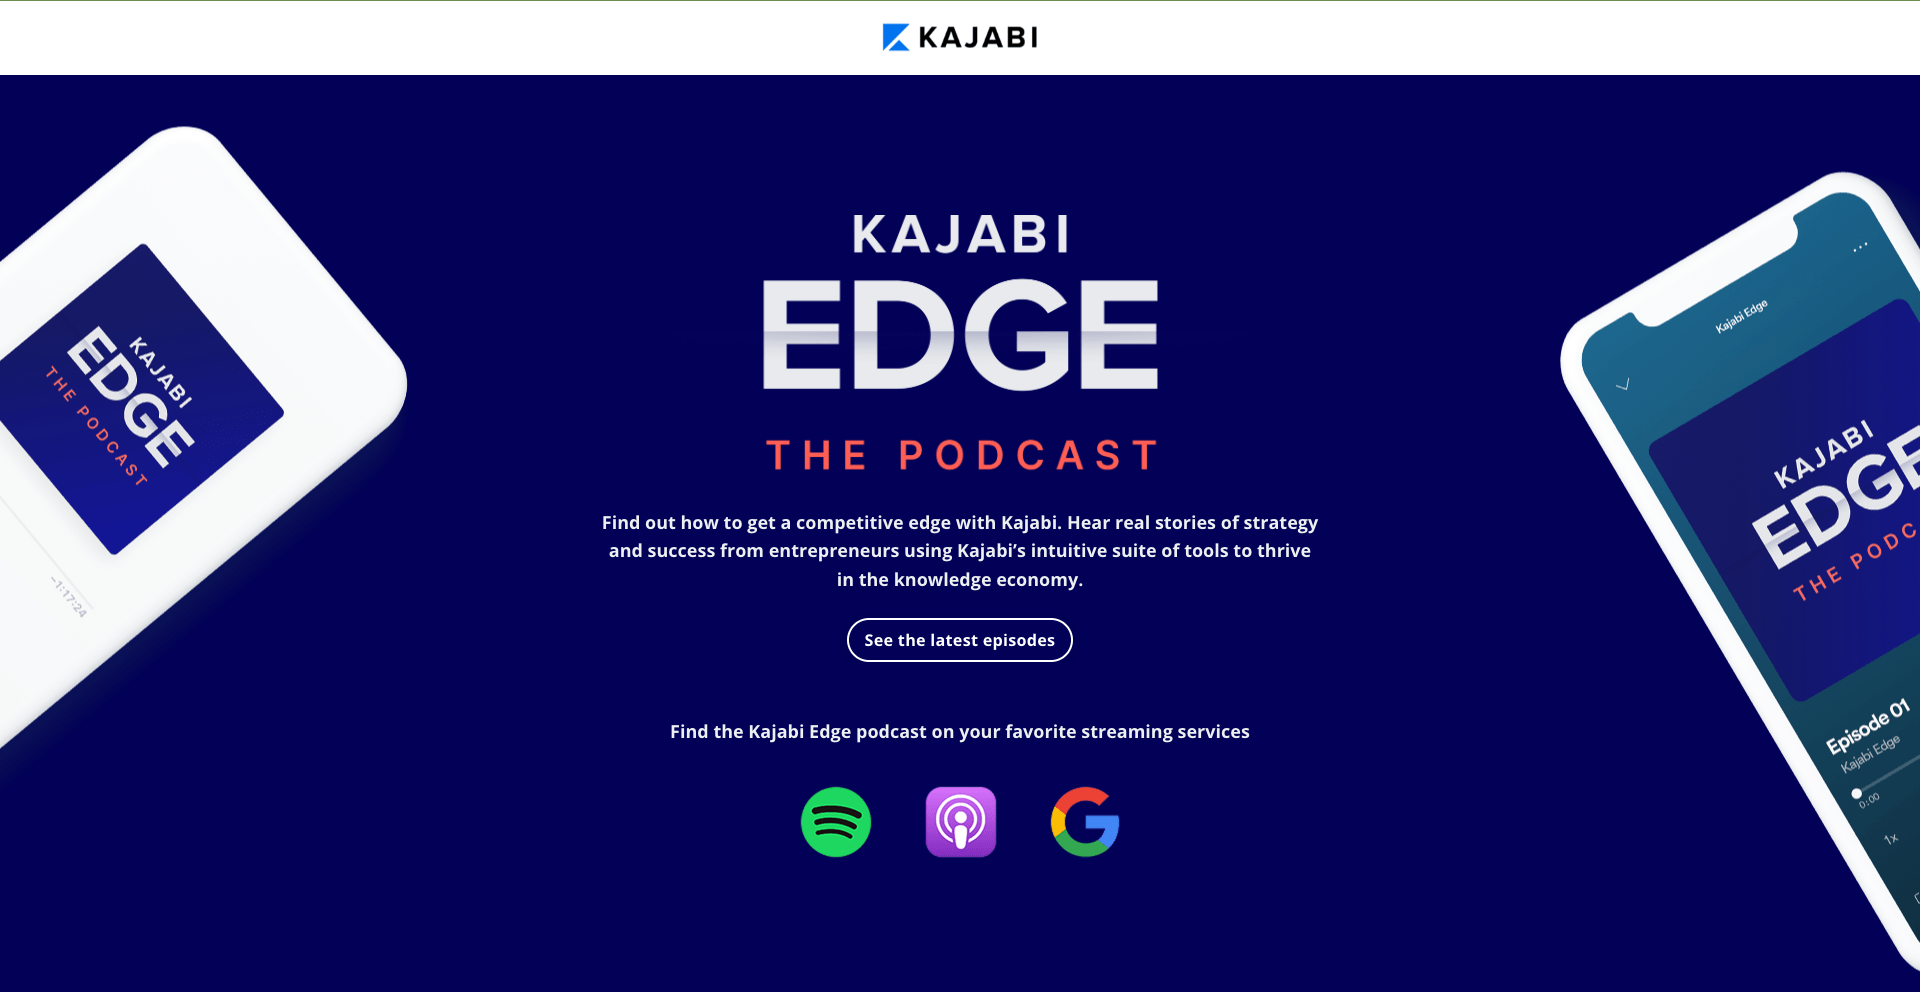 Email Marketing in Other Industries: Screenshot of Kajabi's podcast page